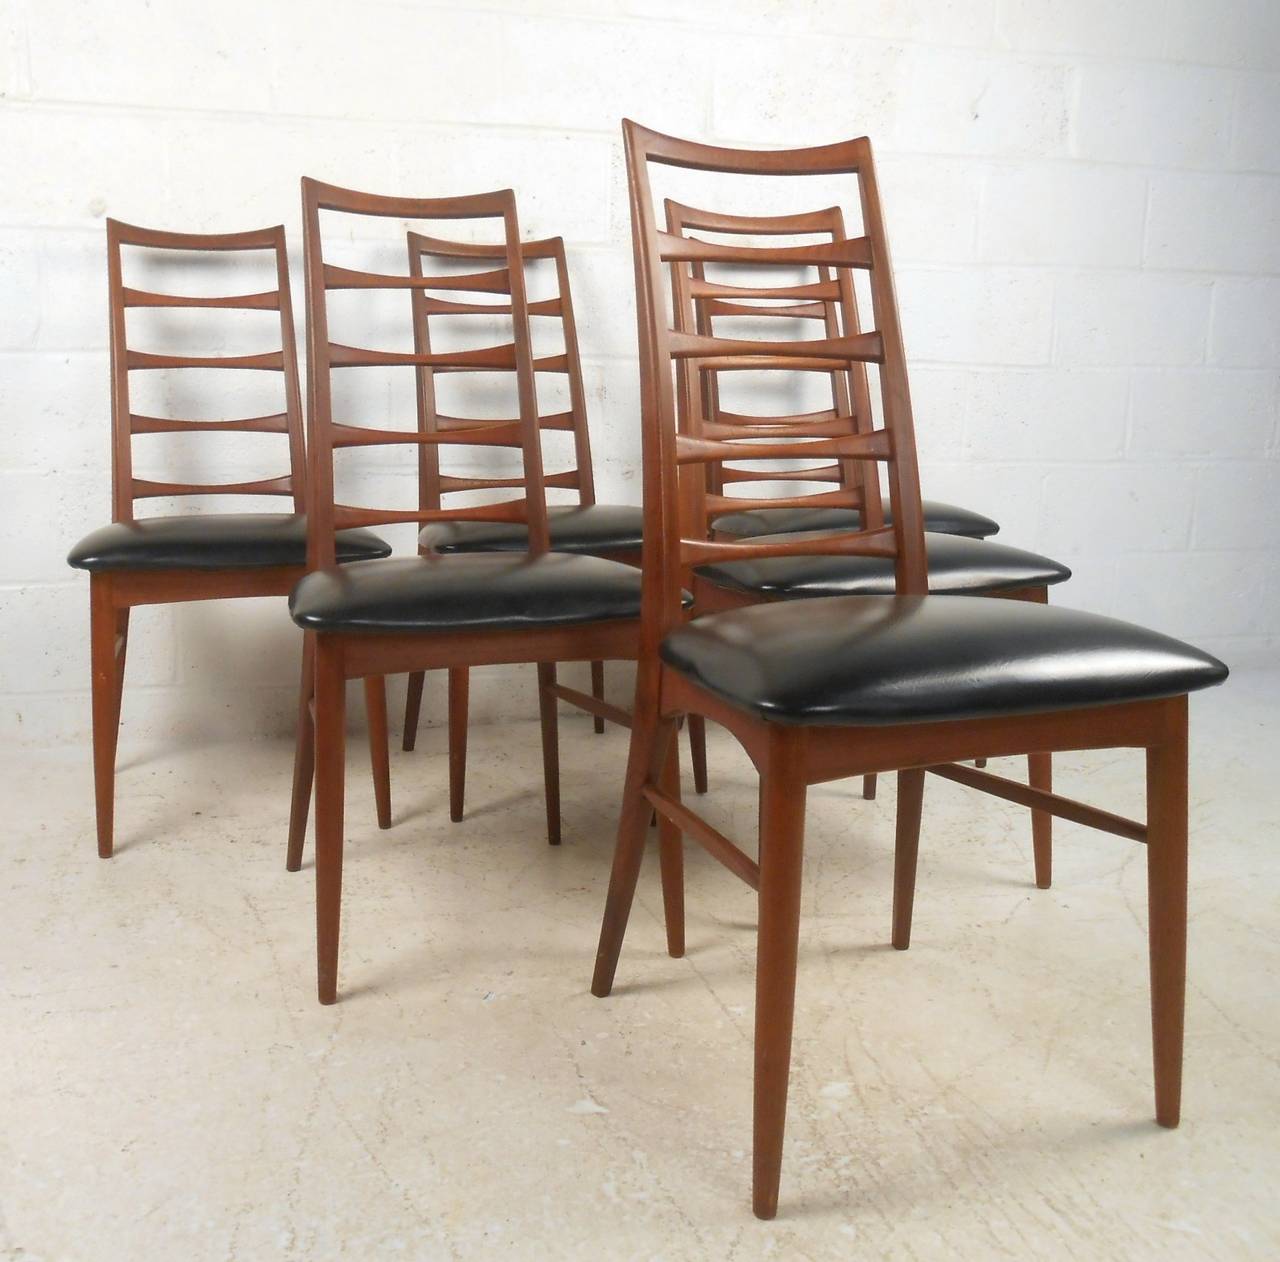 This set of six vintage ladder back chairs make for a beautiful addition to any setting. Manufactured in Denmark for Raymor, the uniquely tapered ladder backs, tapered legs, and stylish design make this teak set truly unique. Please confirm item